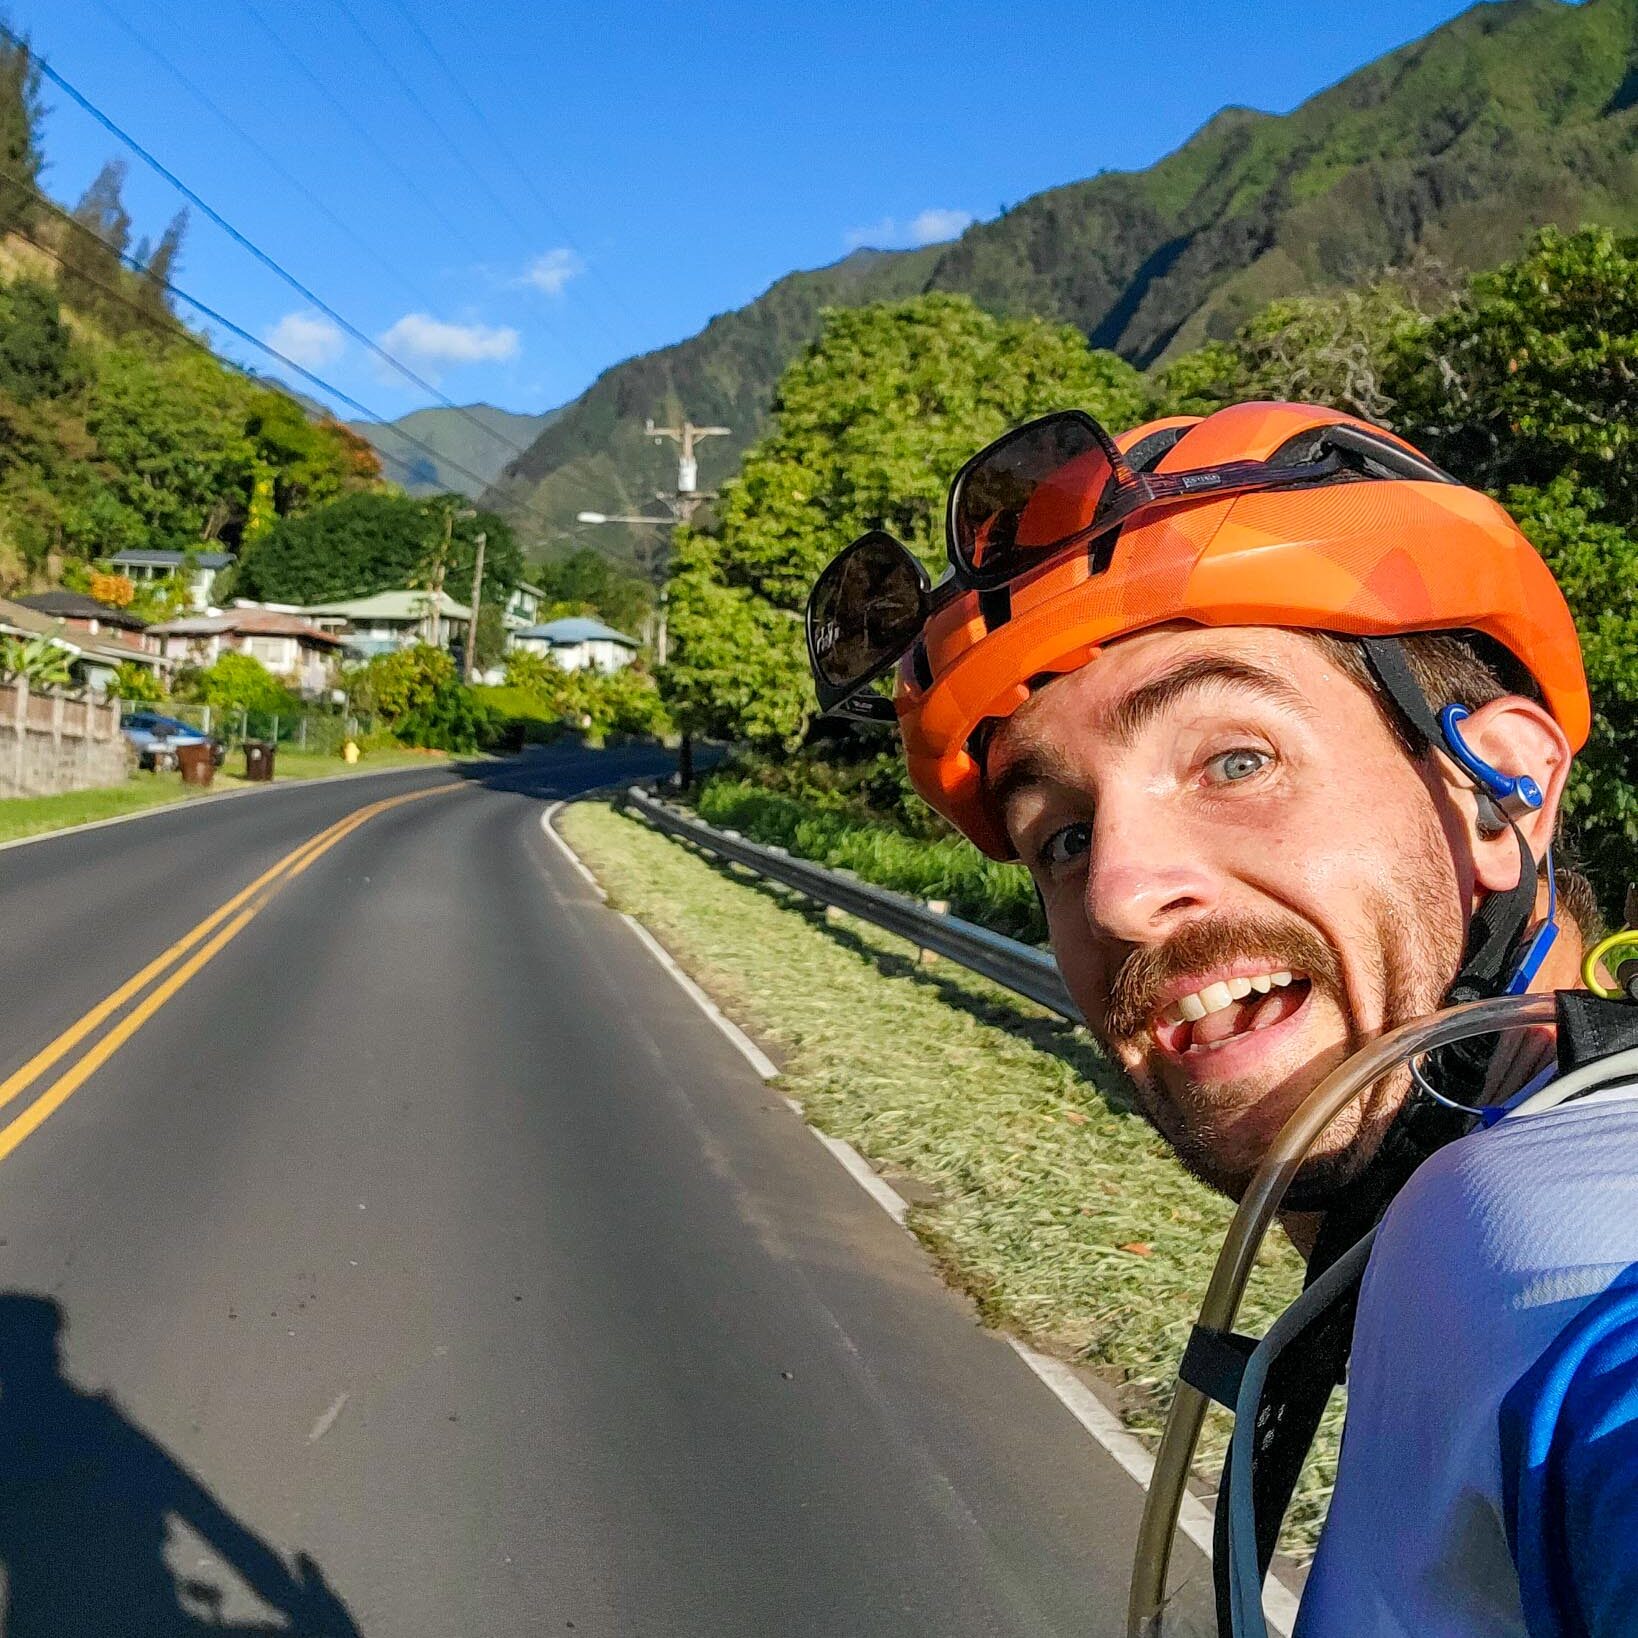 Iao Valley Cycling Ride | Photograph by Conor O'Brian